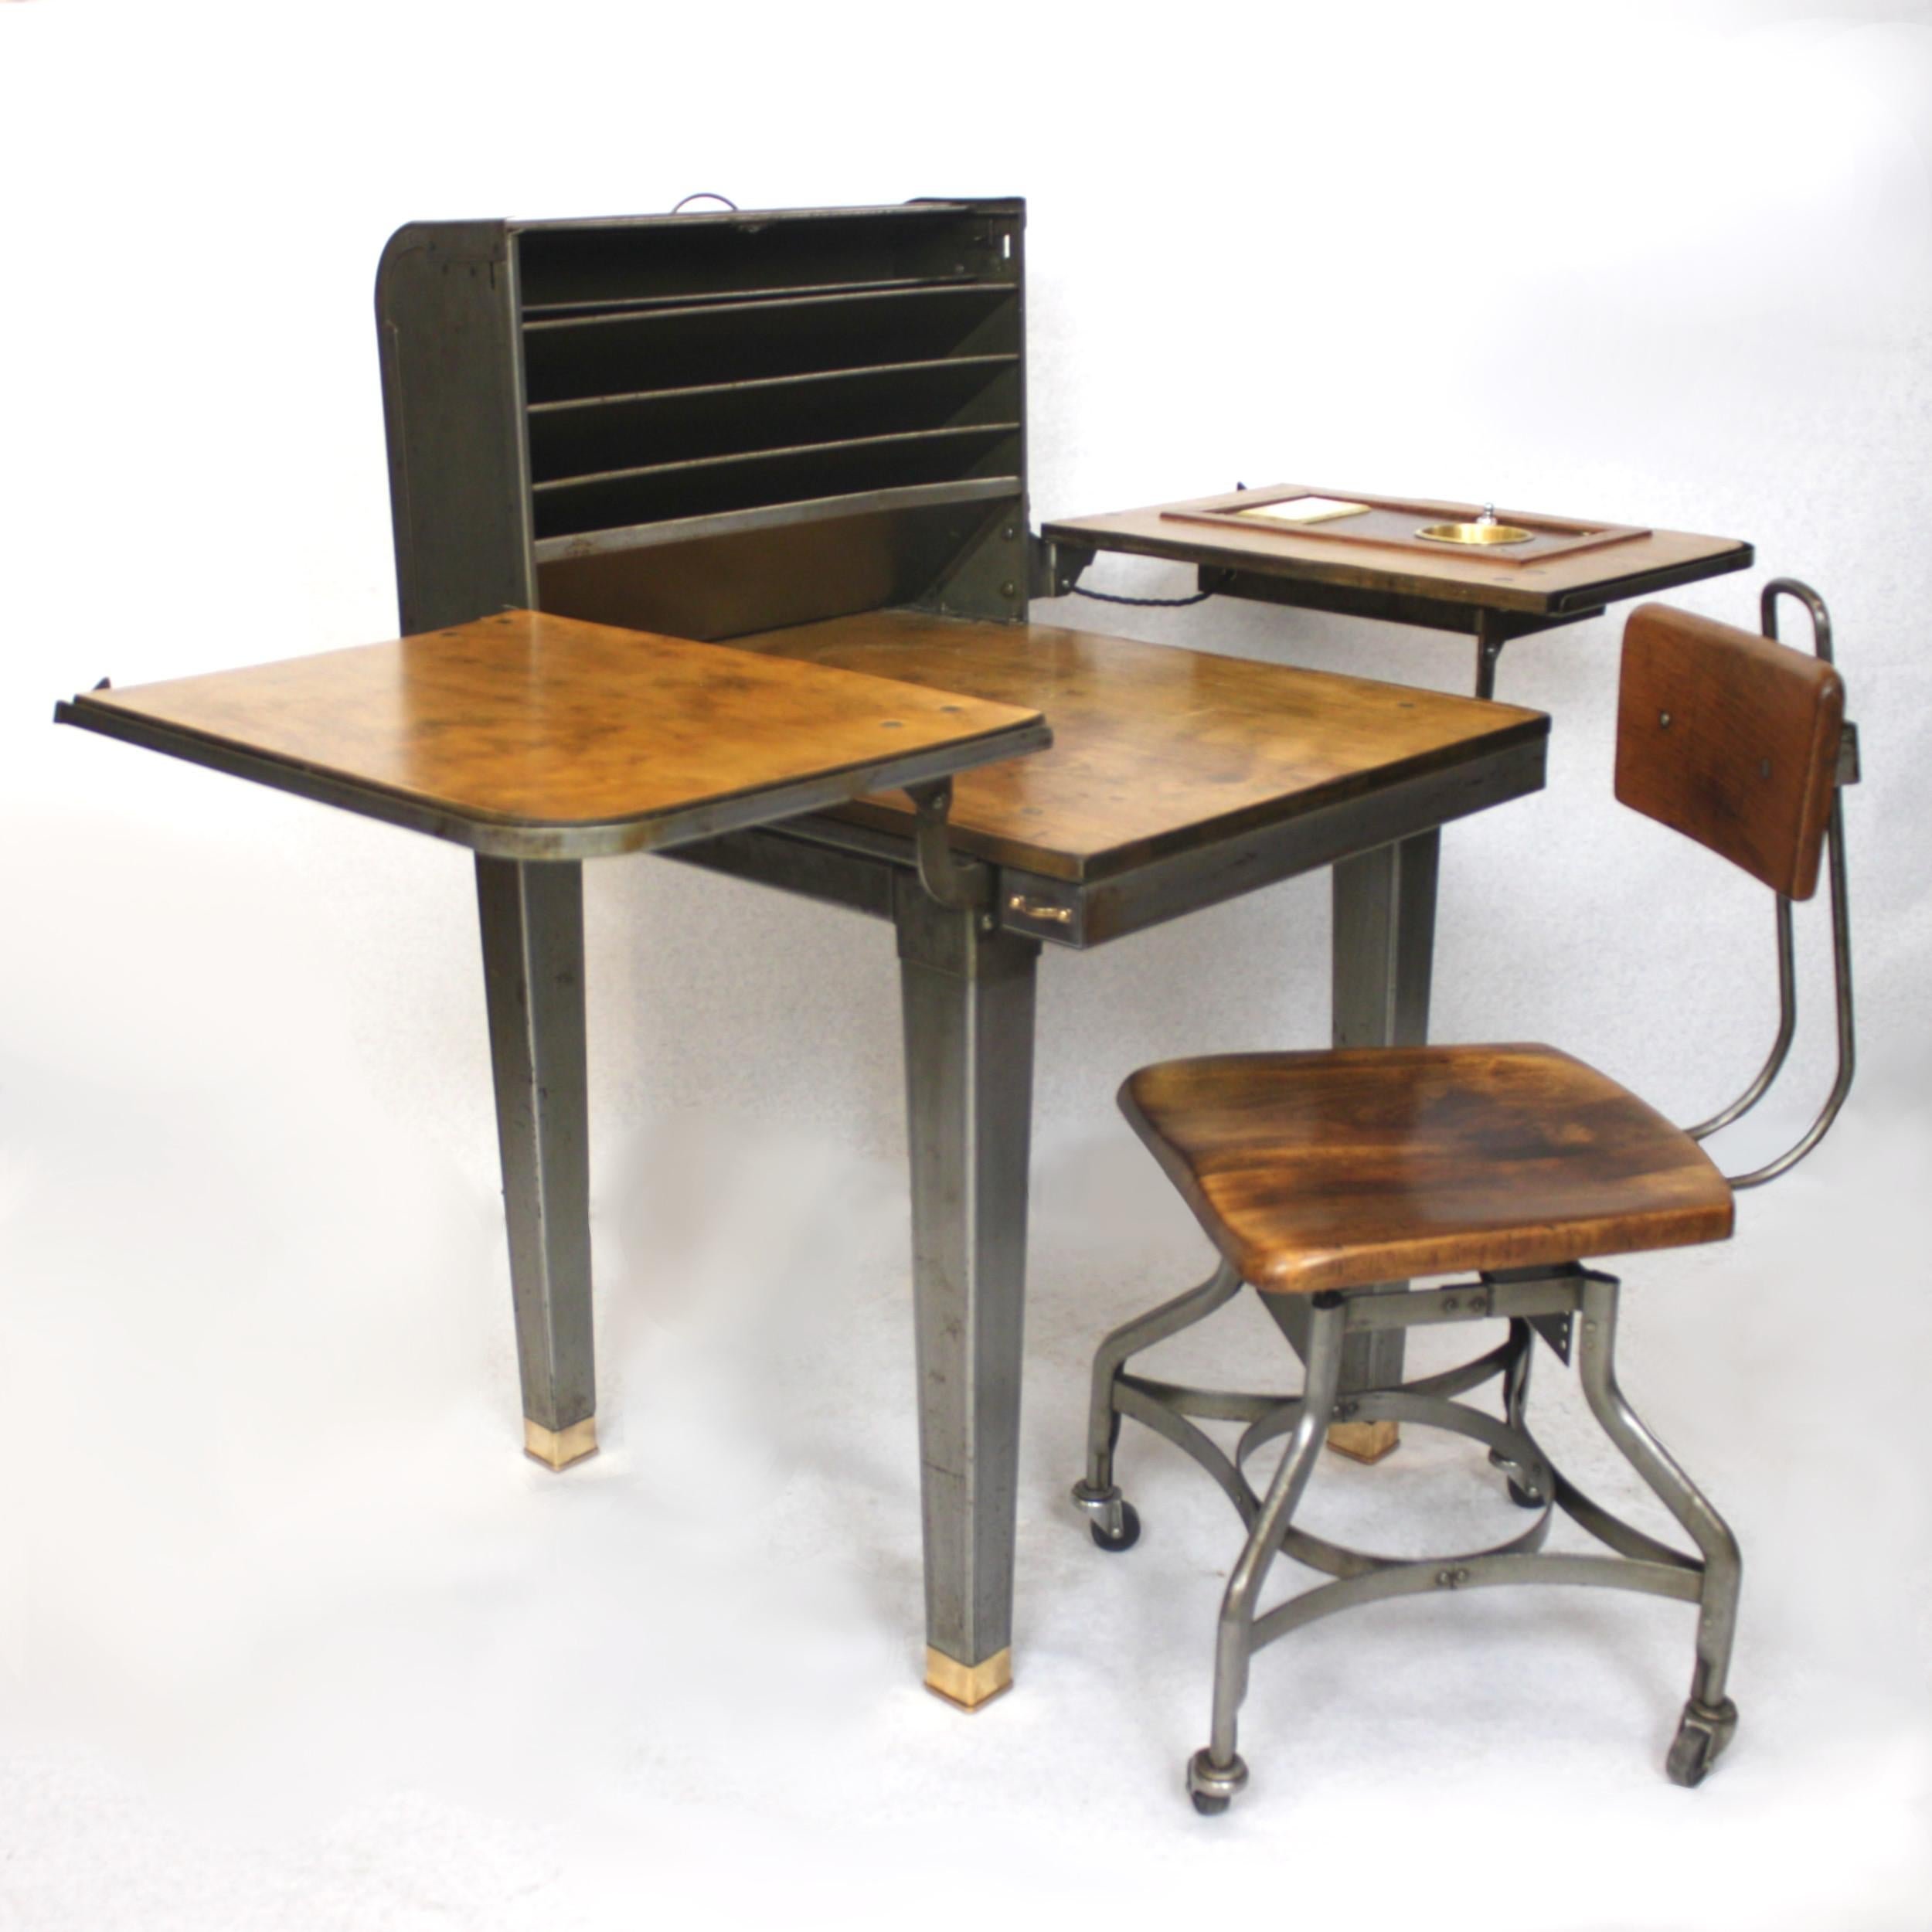 Take command of your office work with this spectacular custom industrial roll-top desk by Toledo. When fully closed this desk exhibits more than a passing resemblance to the WWI English war horse, the Mk. 1 Tank, and is why we named this mini tanker